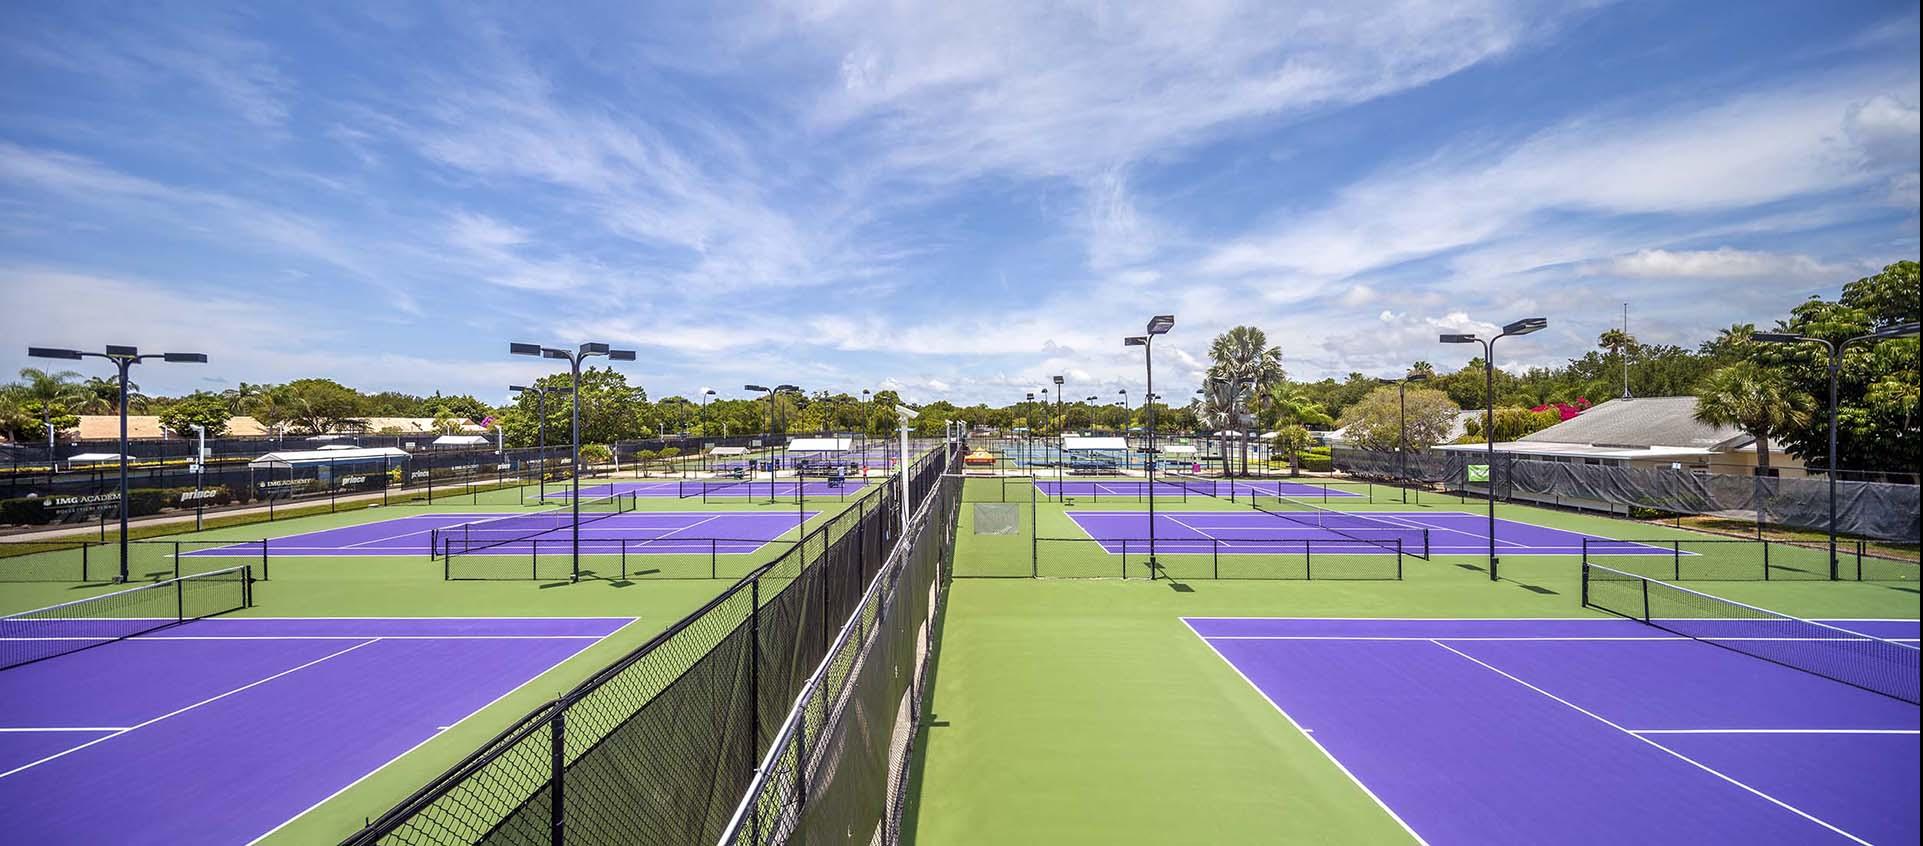 tennis courts at IMG Academy